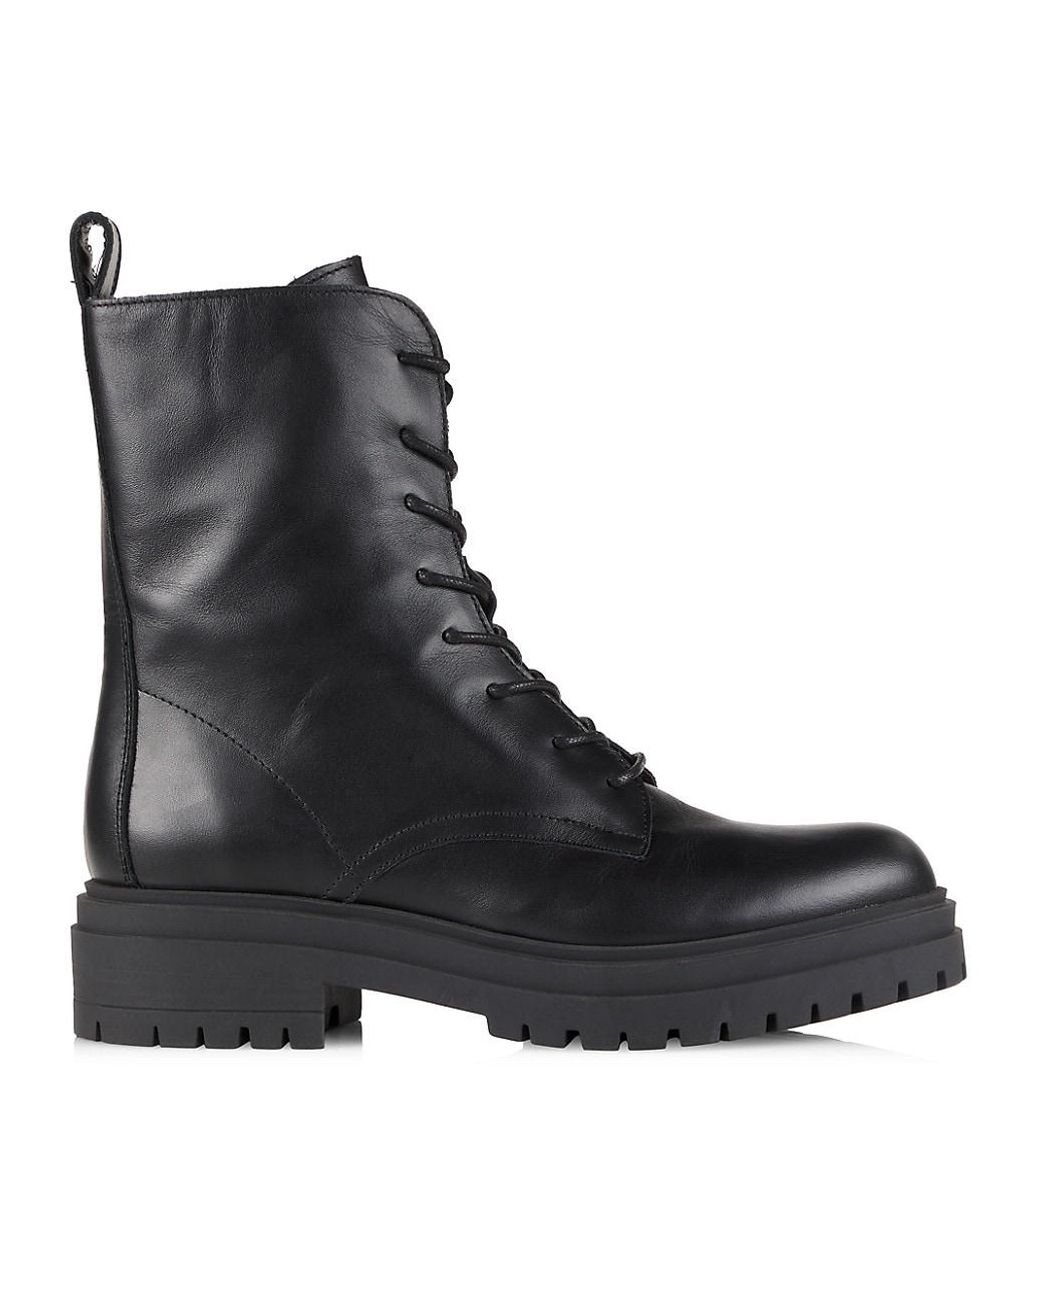 Fifth Avenue Collection 40mm Leather Boots in Black |